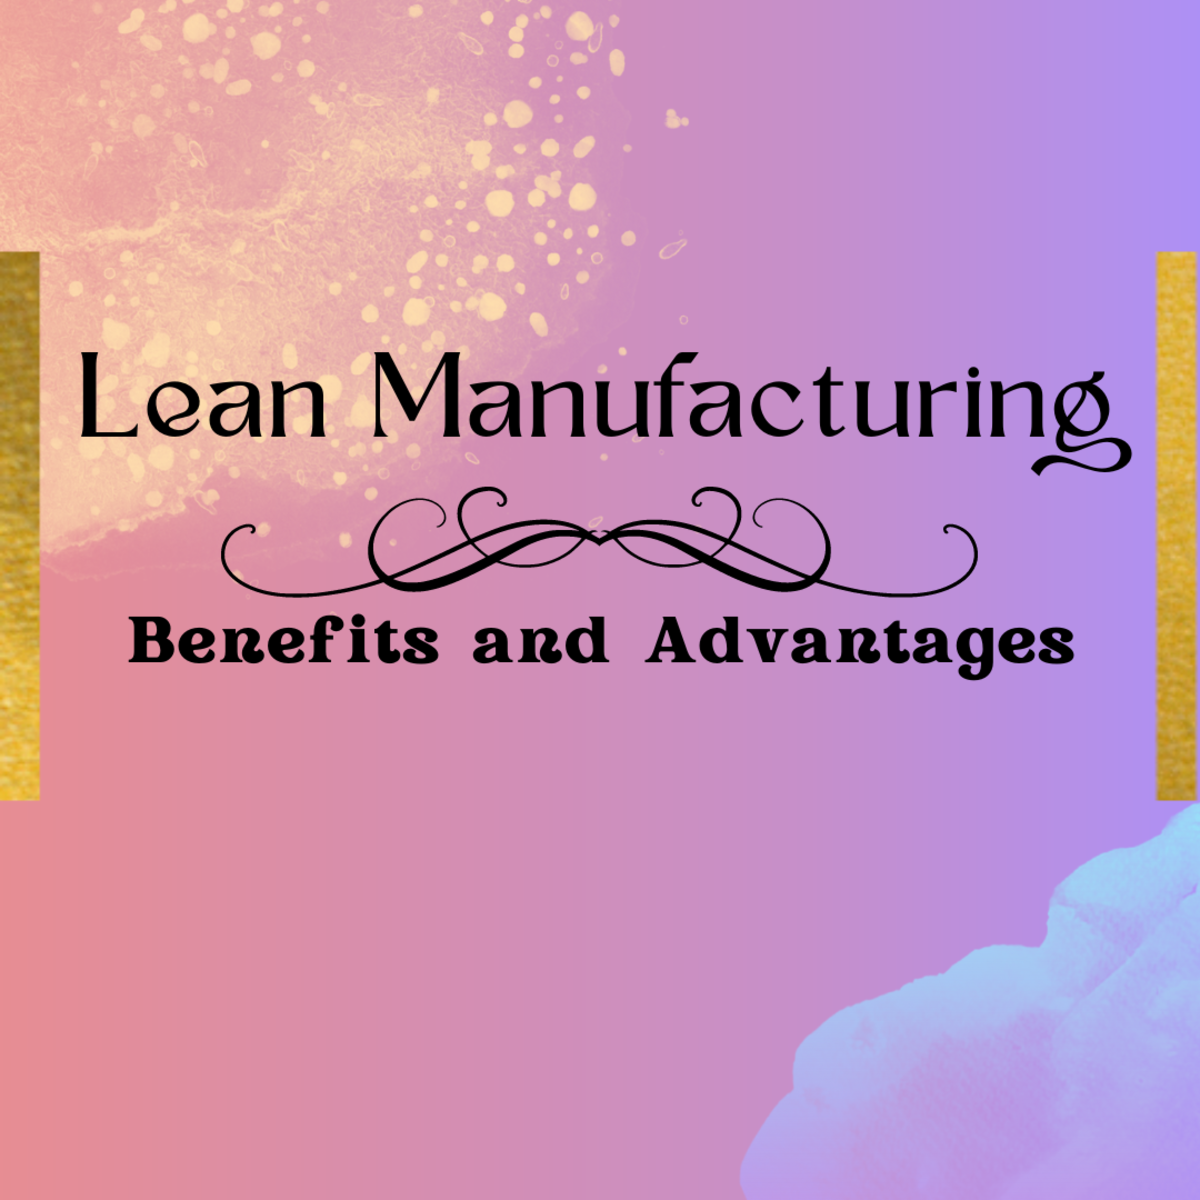 What are the benefits and advantages of lean manufacturing? 